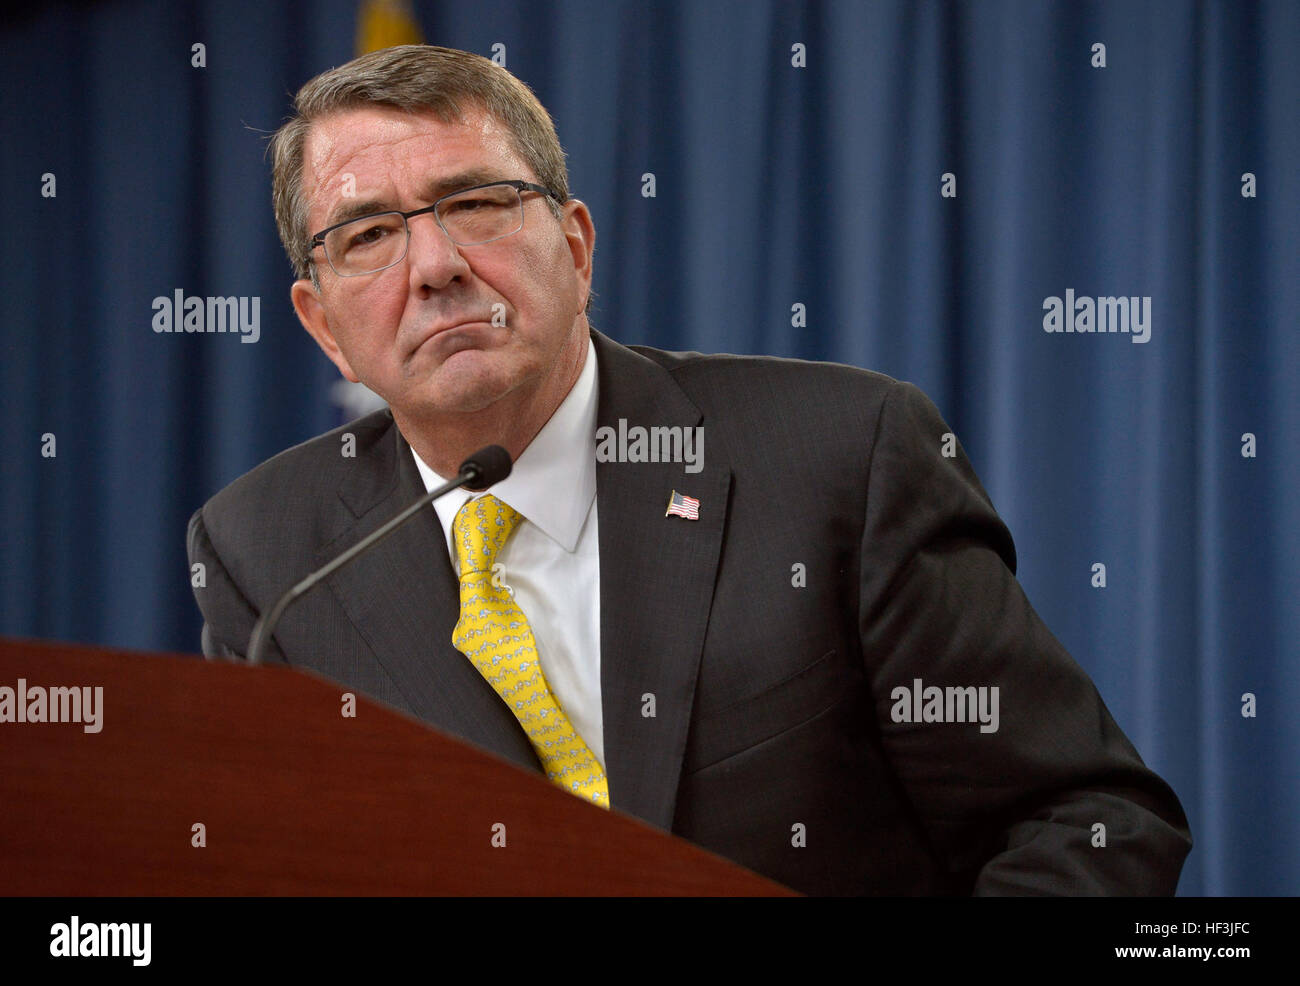 Secretary of Defense Ash Carter conducts a press briefing at the Pentagon Aug. 20, 2015. Carter answered questions from the media on a variety of issues including regional threats across the globe and potential logjams in Congress over the budget this fall. Carter also pointed out the recent graduation of the first two female soldiers of Army Ranger School, a significant milestone in DoD's plan to test the integration of women in combatant roles. (DoD Photo by Glenn Fawcett/Released) Defense secretary congratulates first female graduates of US Army Ranger School 150820-D-NI589-200 Stock Photo